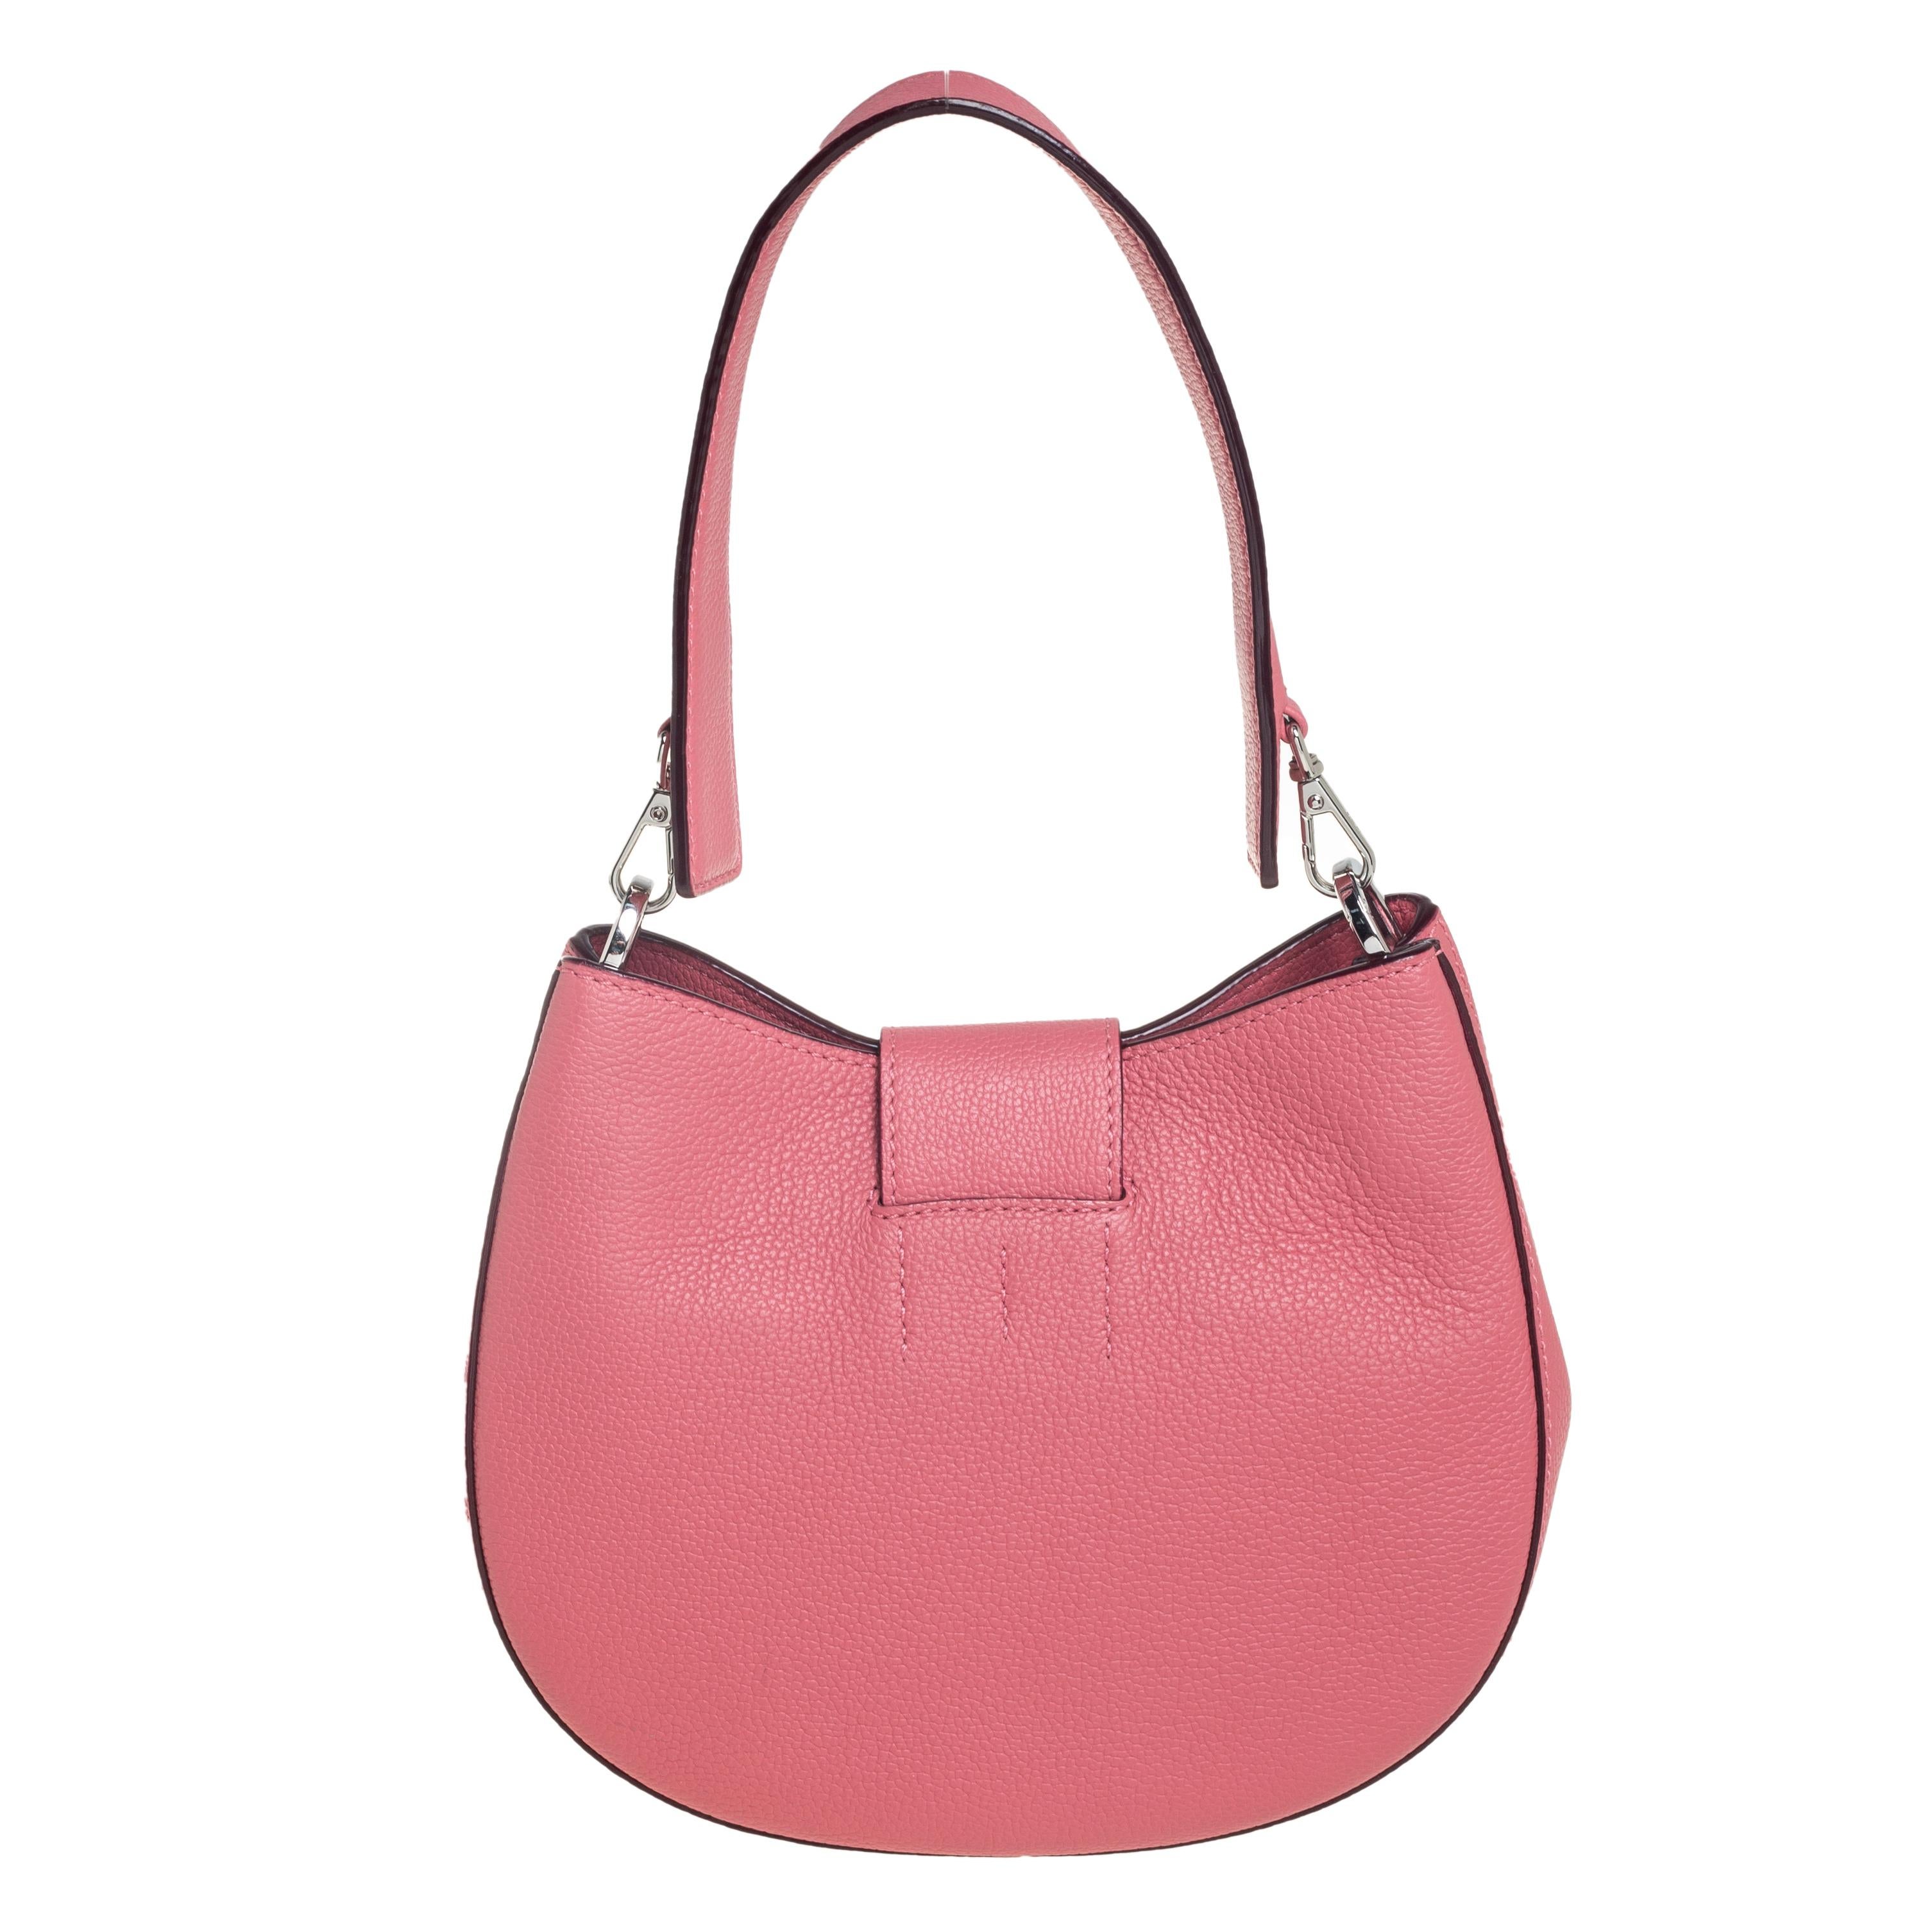 Complete your casual look with this stylish MCM Patricia hobo. It is made with pink leather and comes with a detachable shoulder strap. The front flap opens to a spacious interior lined with Alcantara. The engraved, silver-tone lock at the front